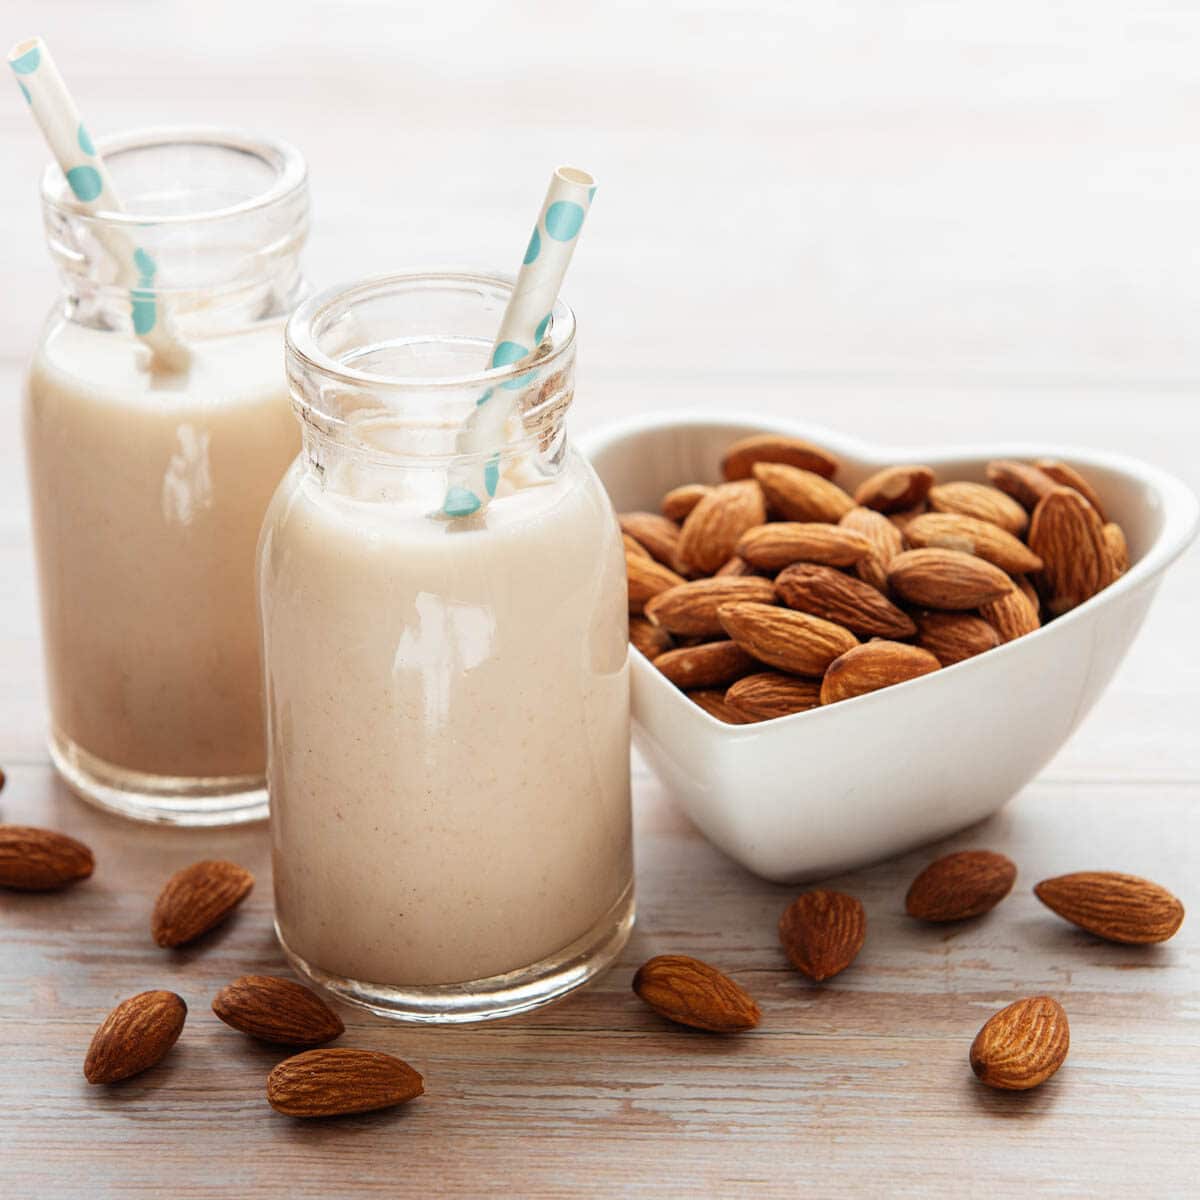 Two small glass jars of almond milk with a heart shaped bowl of almonds next to them.